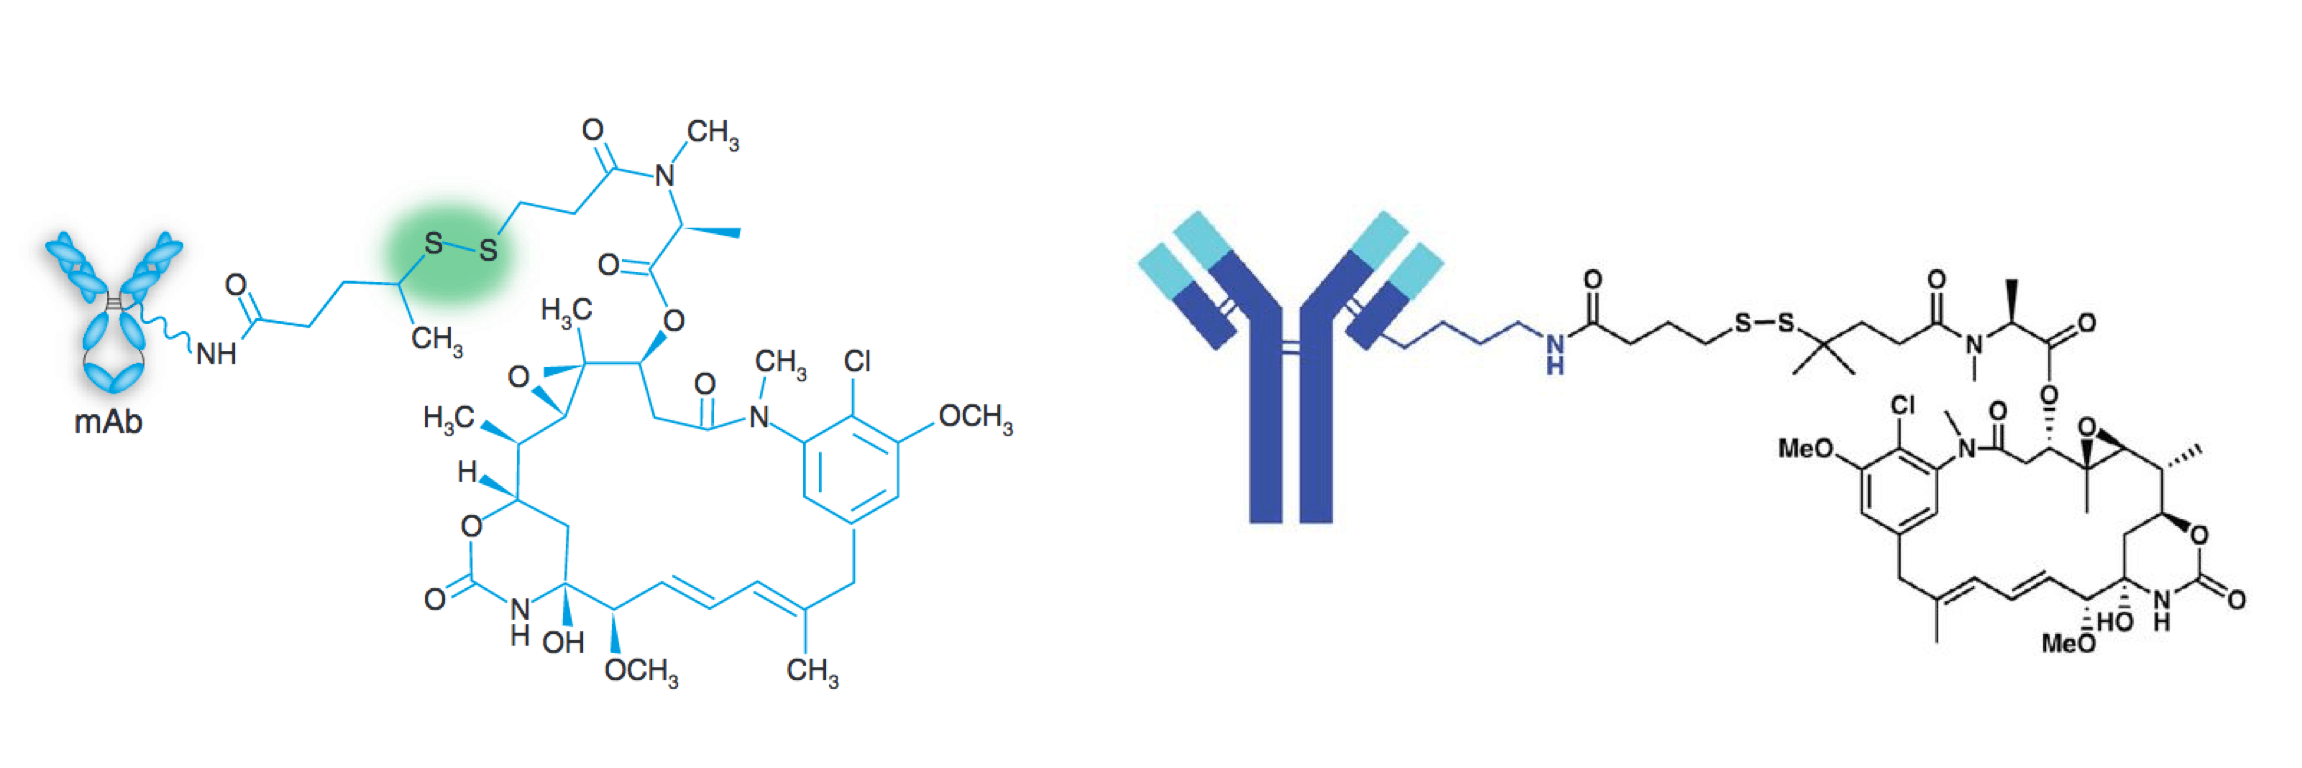 Strcutre of ADCs containing a disulfide linker. Maytansinoid derivative payload DM1 (left, Nat. Biotechnol., 2005) and DM4 (right, Mol. Cancer. Ther., 2012) are conjugated with mAbs and the disulfide bonds are cleaved upon intracellular reduction to release the payloads.